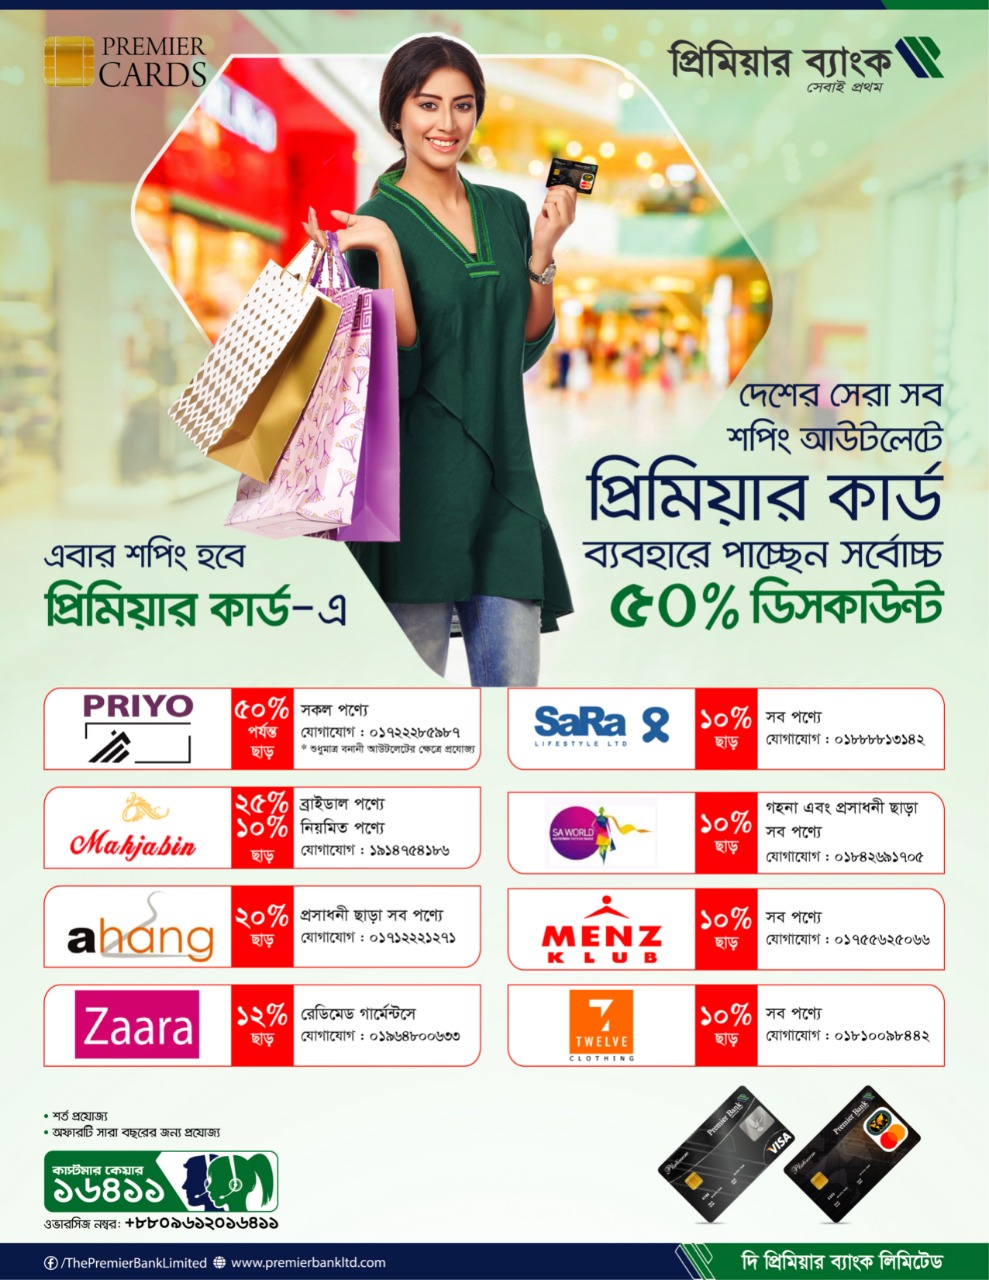 Maximum 50% discount on shopping with Premier Bank cards